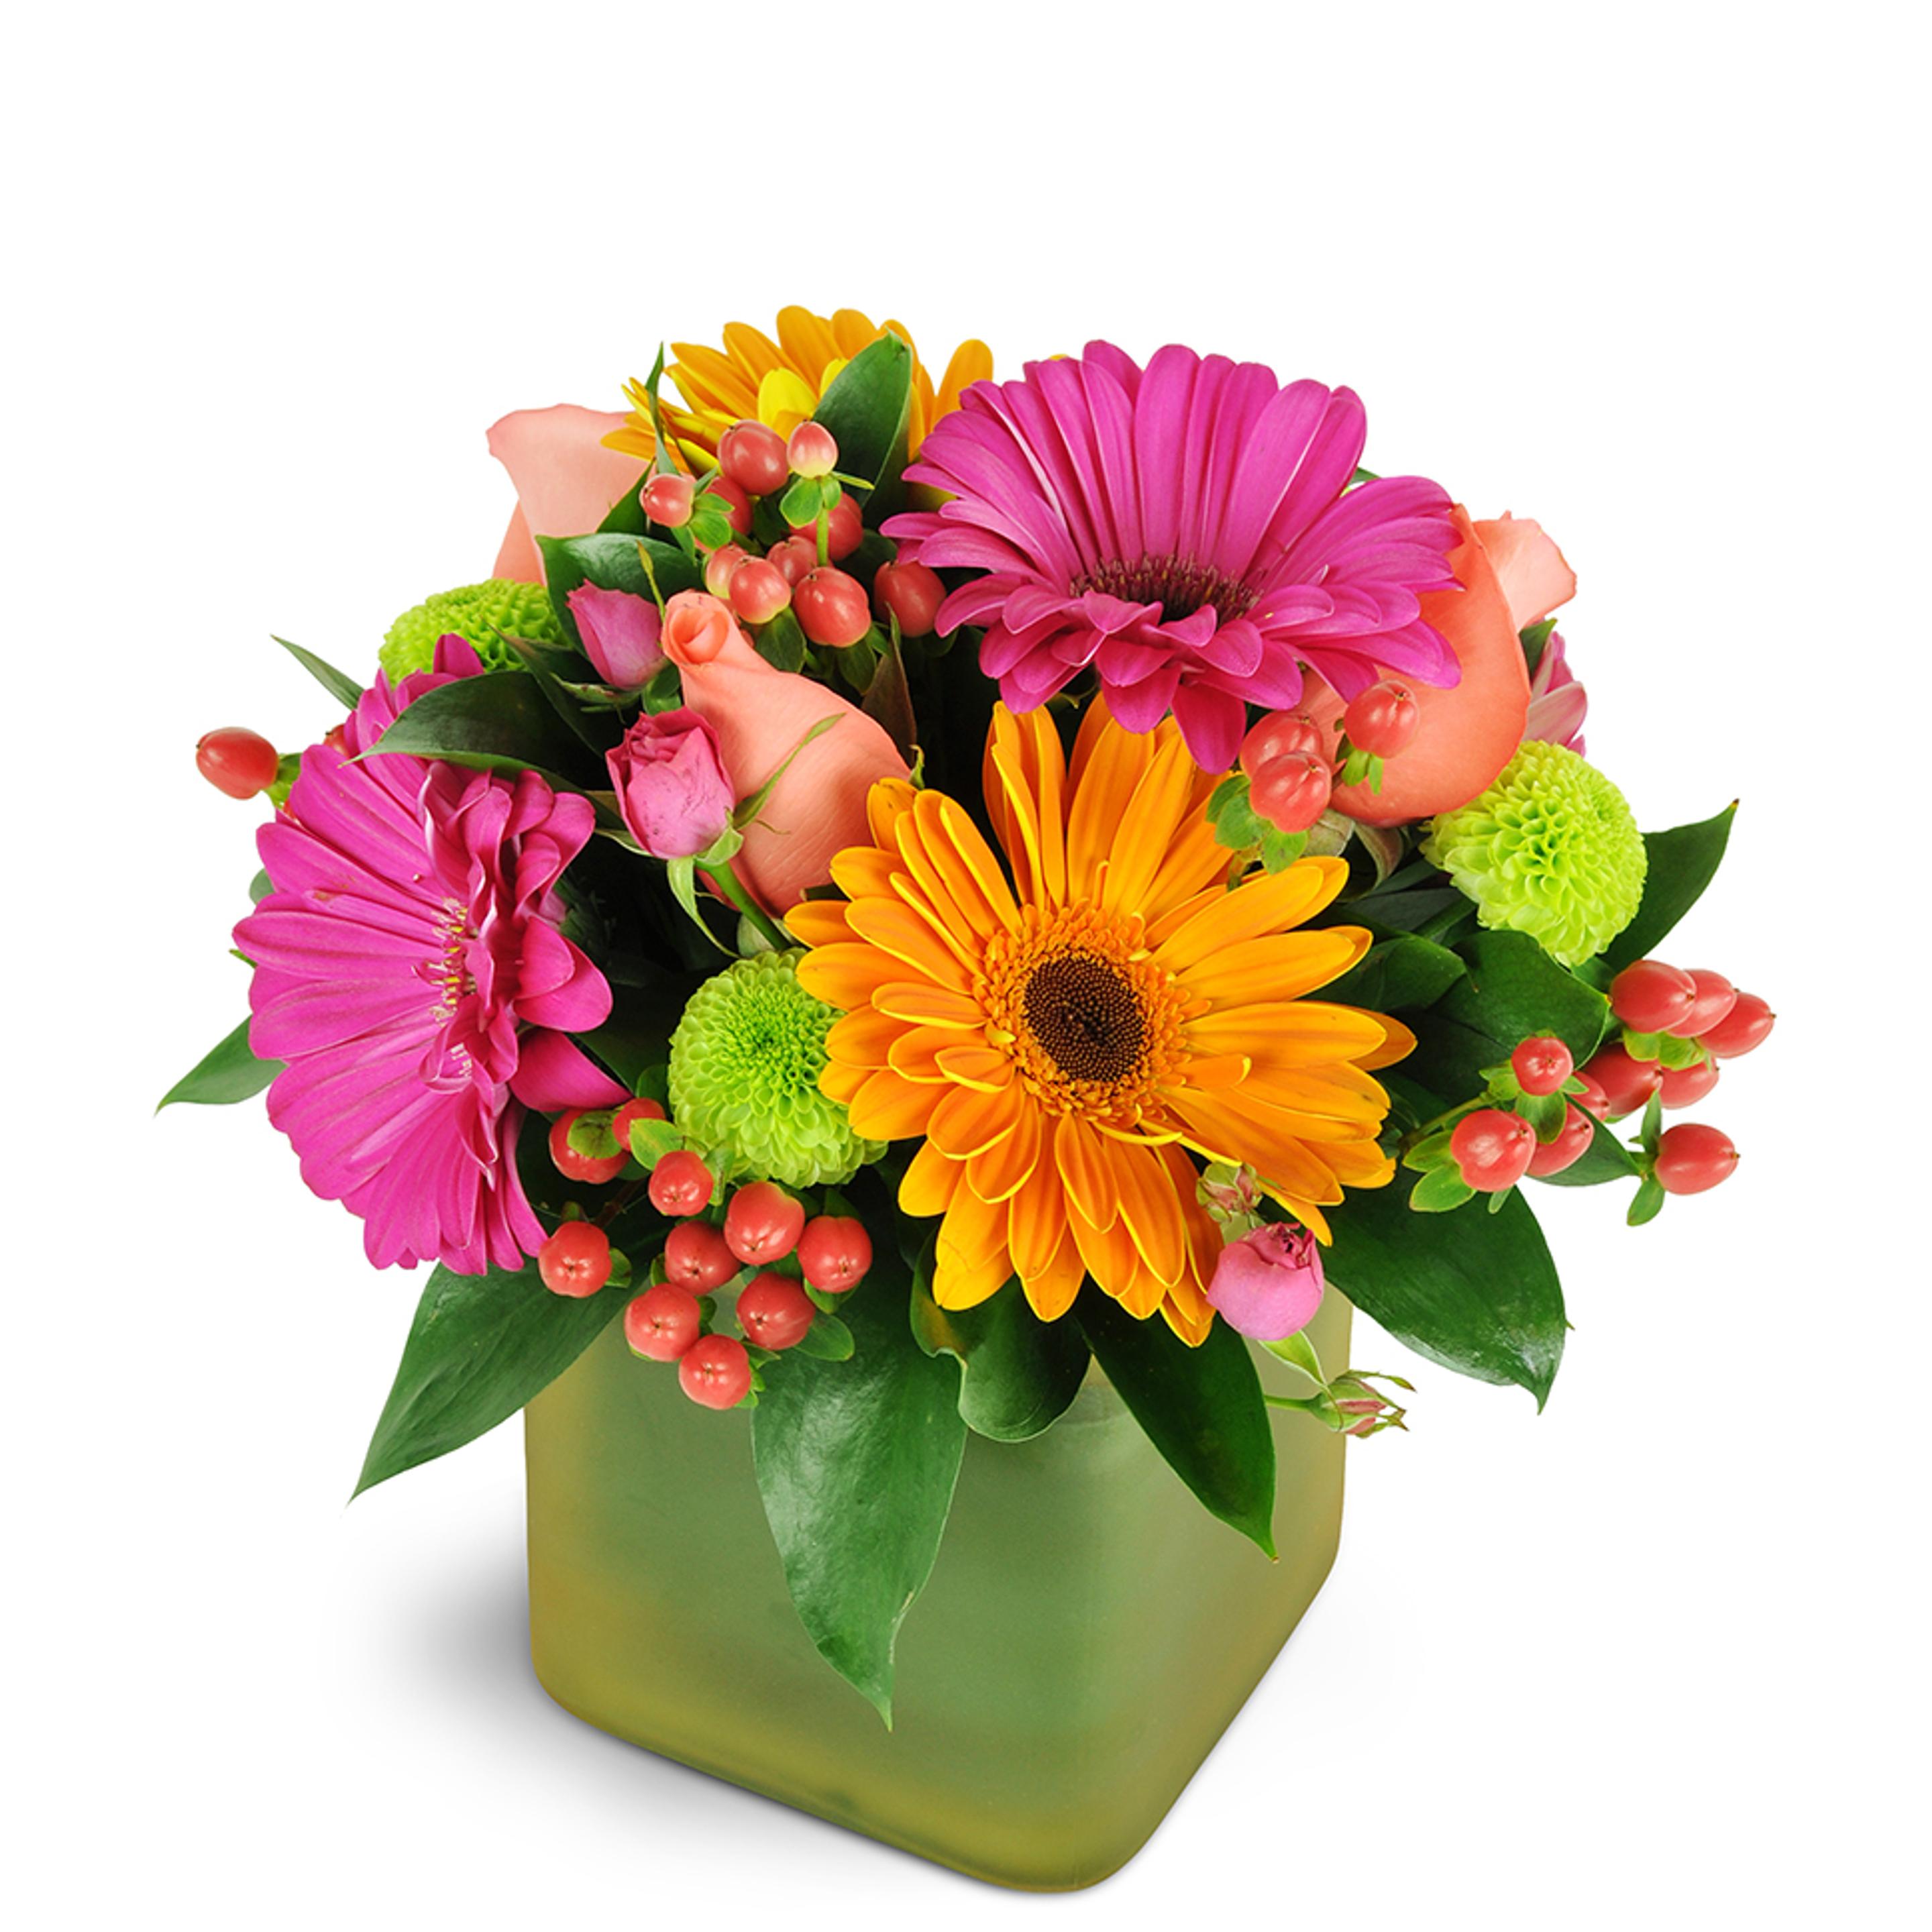 Beautiful bright flowers arranged in green vase to celebrate the arrival of a newborn.